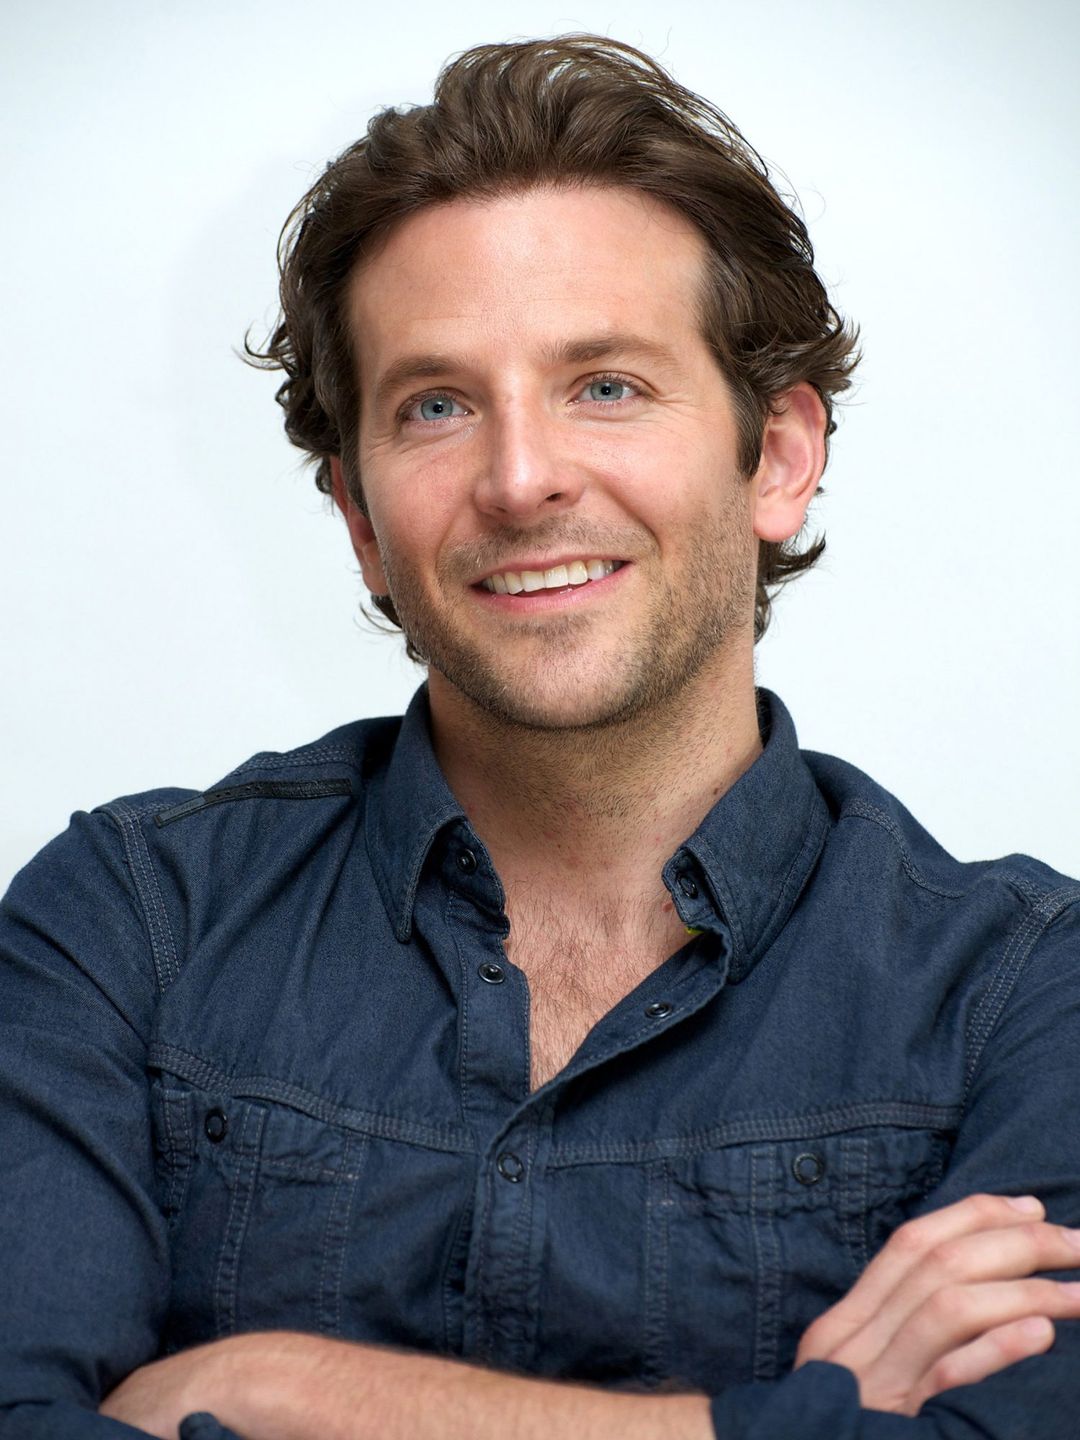 Bradley Cooper who are his parents